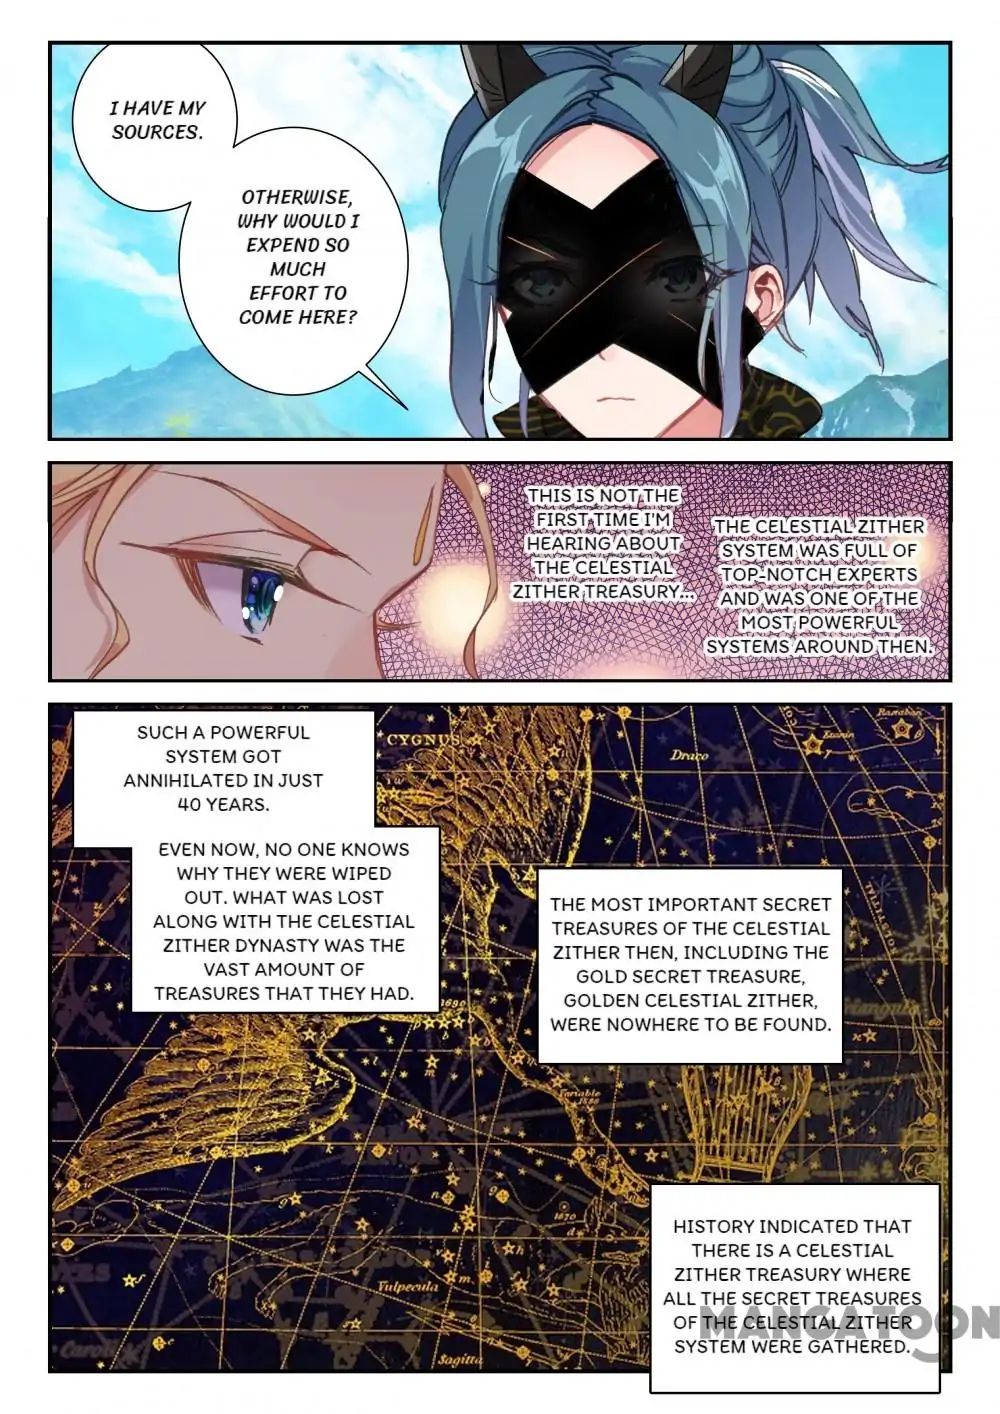 Undefeated Battle God - Page 2